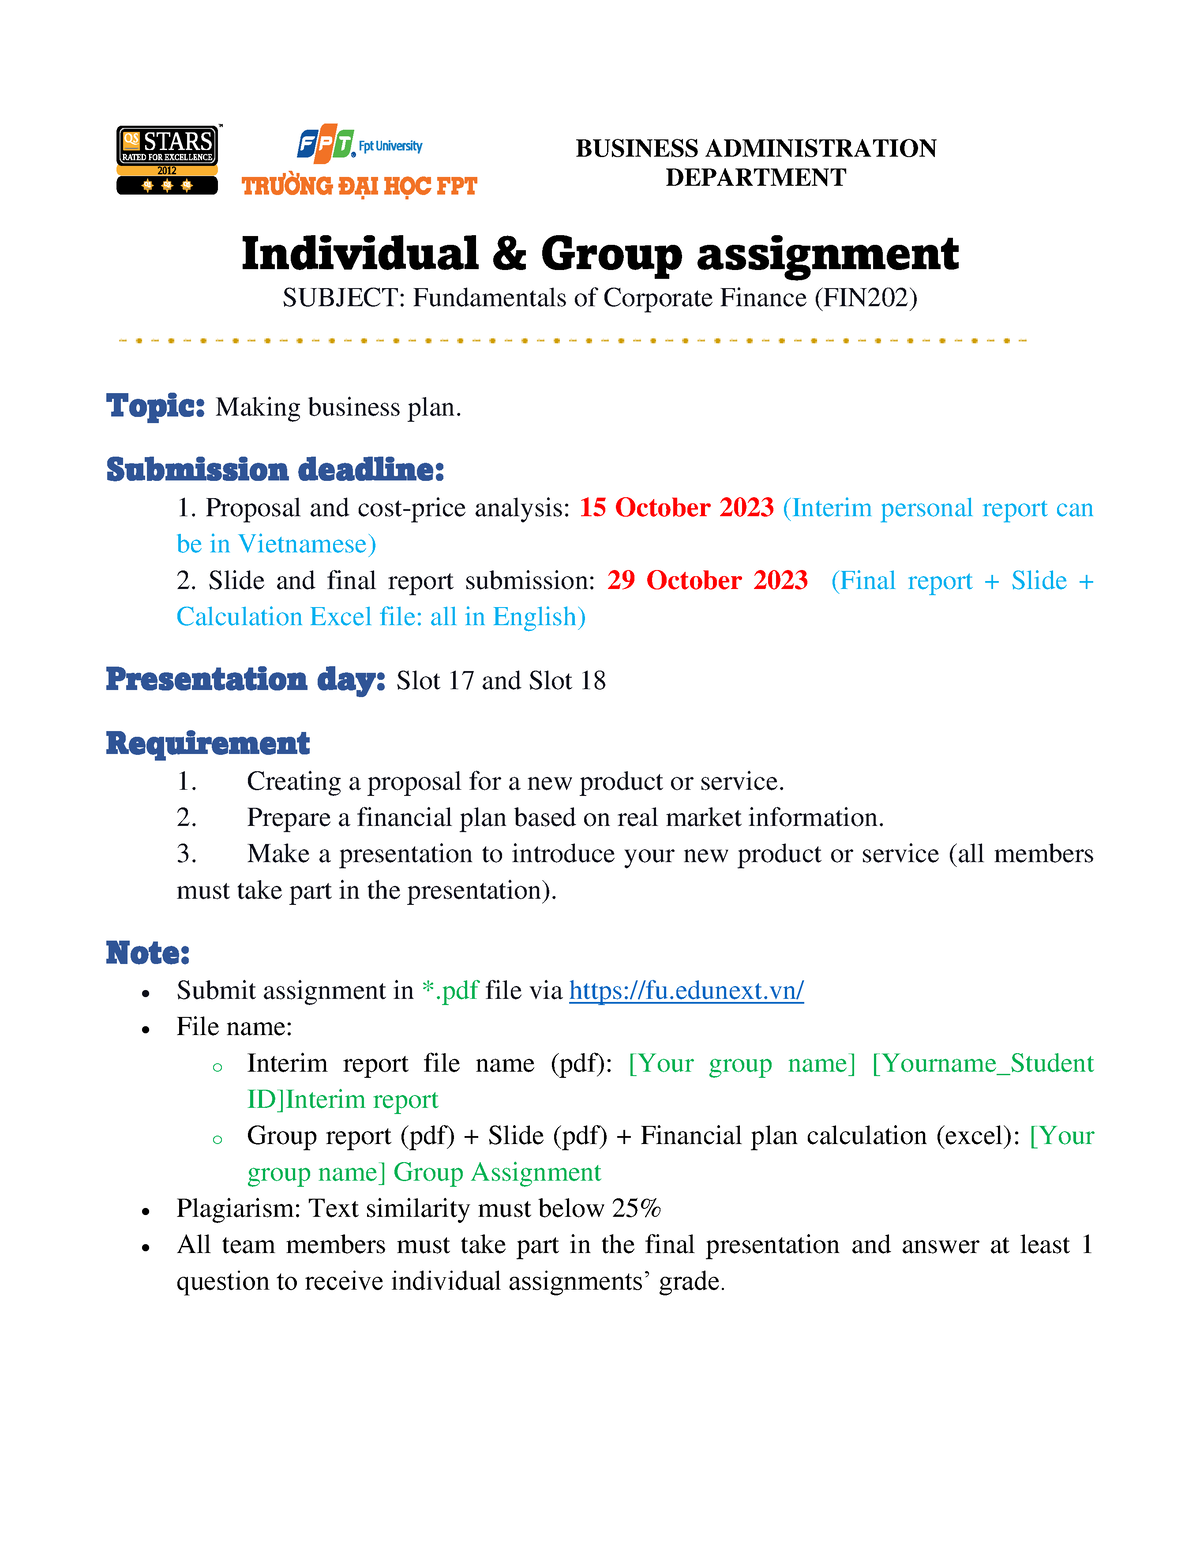 group assignment fin202